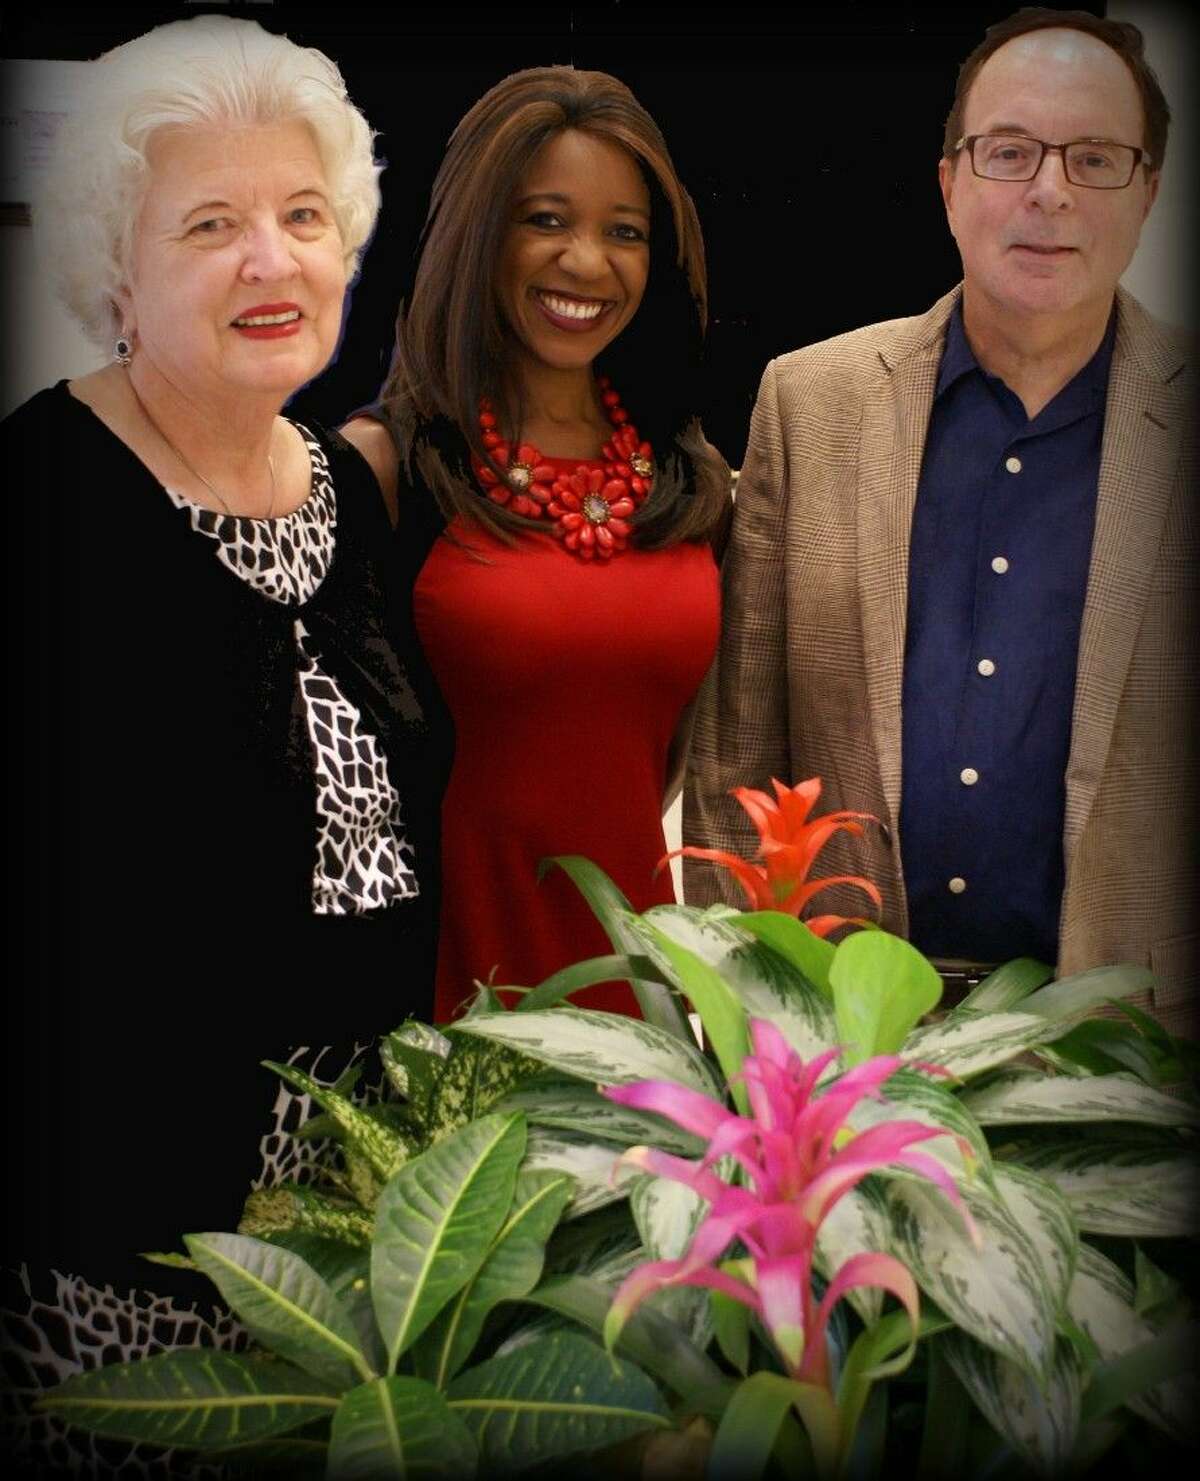 Left to right: FBFN Foundation President Carole Kanusky, Fox 26 news analyst and Baly Projects CEO Jacquie Baly and Ken Kaser, director of the University of Houston Conrad Hilton Hotel College's Sugar Land program.